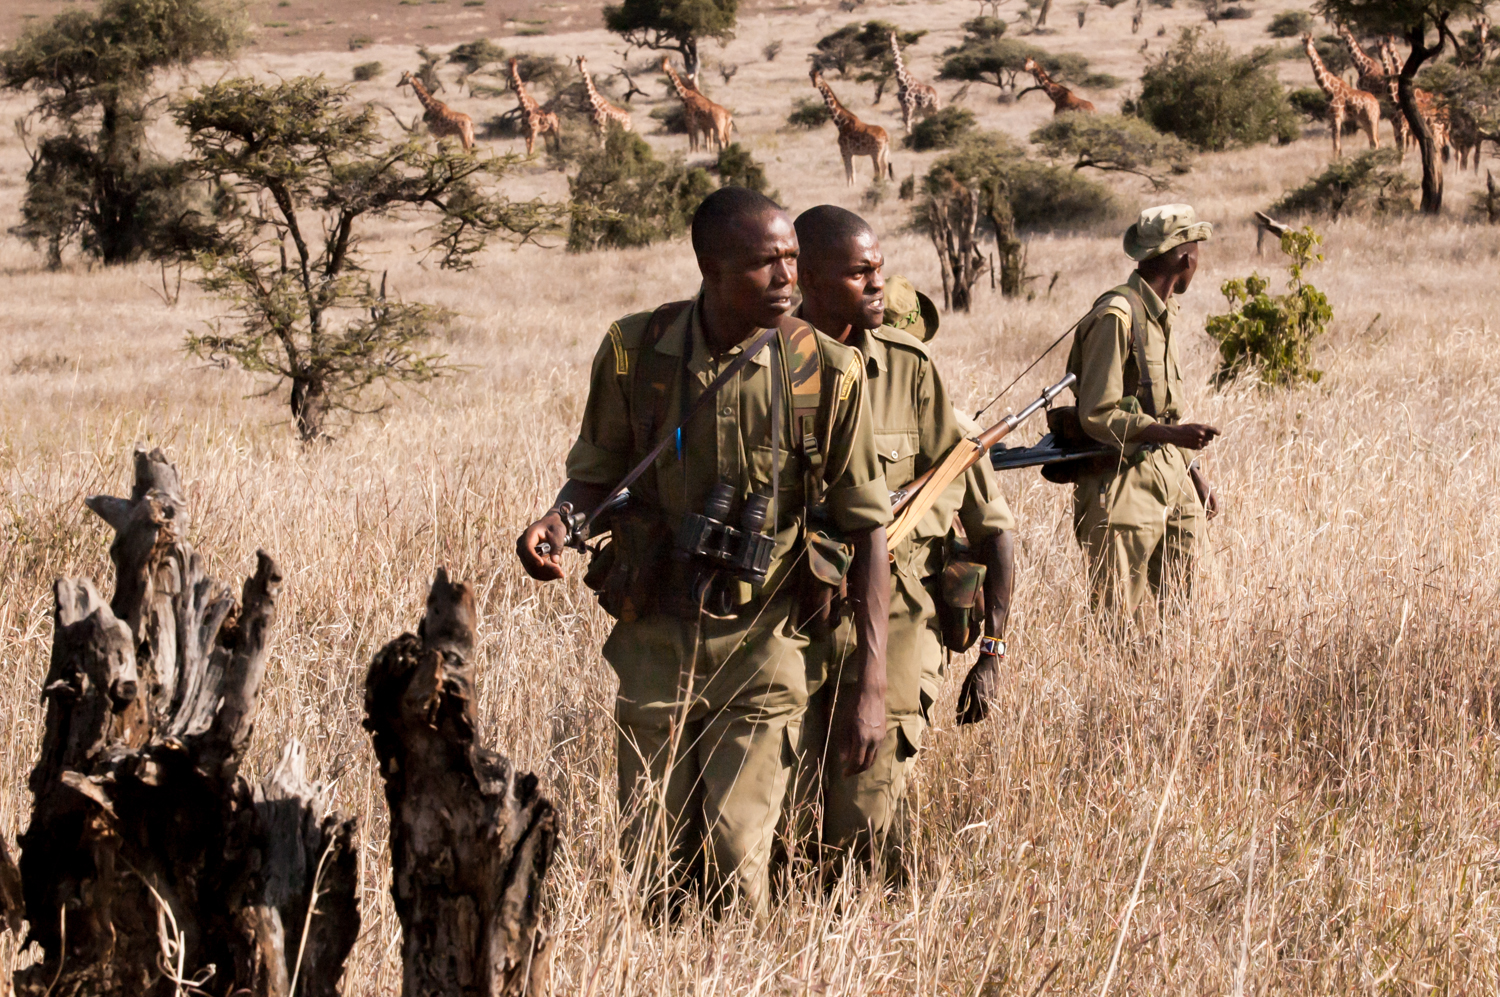  Members of an anti-poaching unit patrol the wildlife park in Northern Kenya. Based at the Lewa Wildlife Conservancy in Northern Kenya, the privately funded anti-poaching unit has received permission from the Kenyan government to shoot to kill. Most 